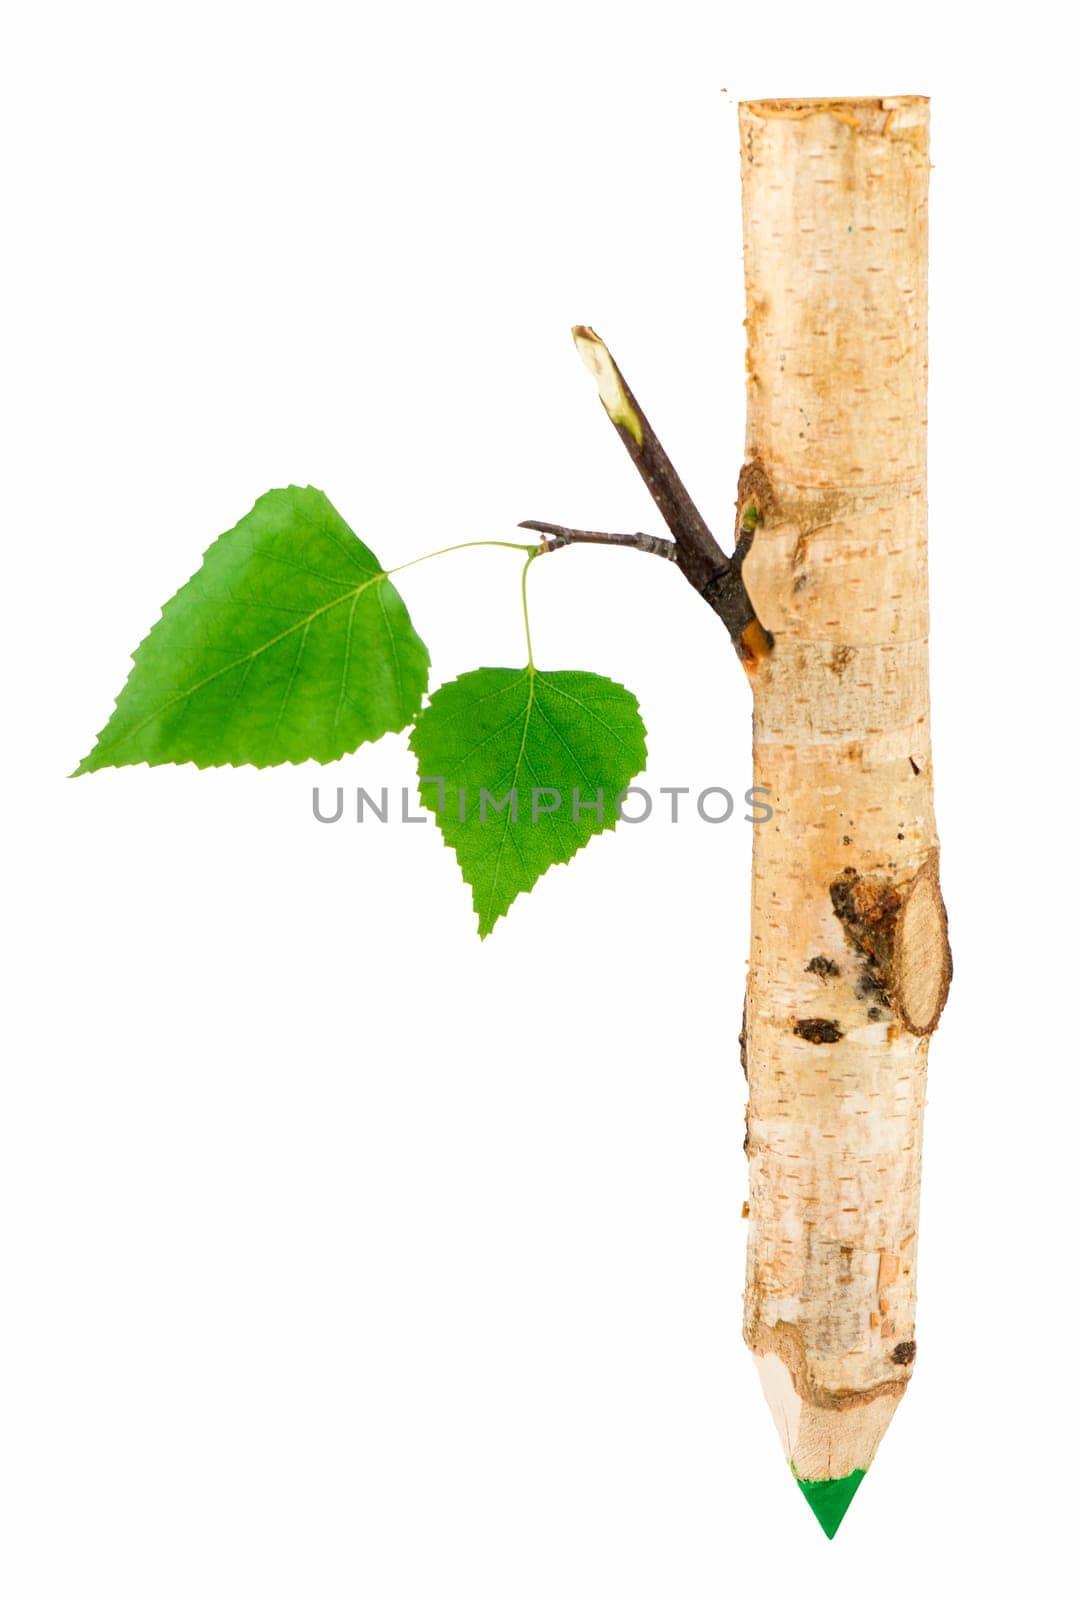 Concept Nature and production of wood products. wood for pencils. the green pencil is made of a birch branch by aprilphoto